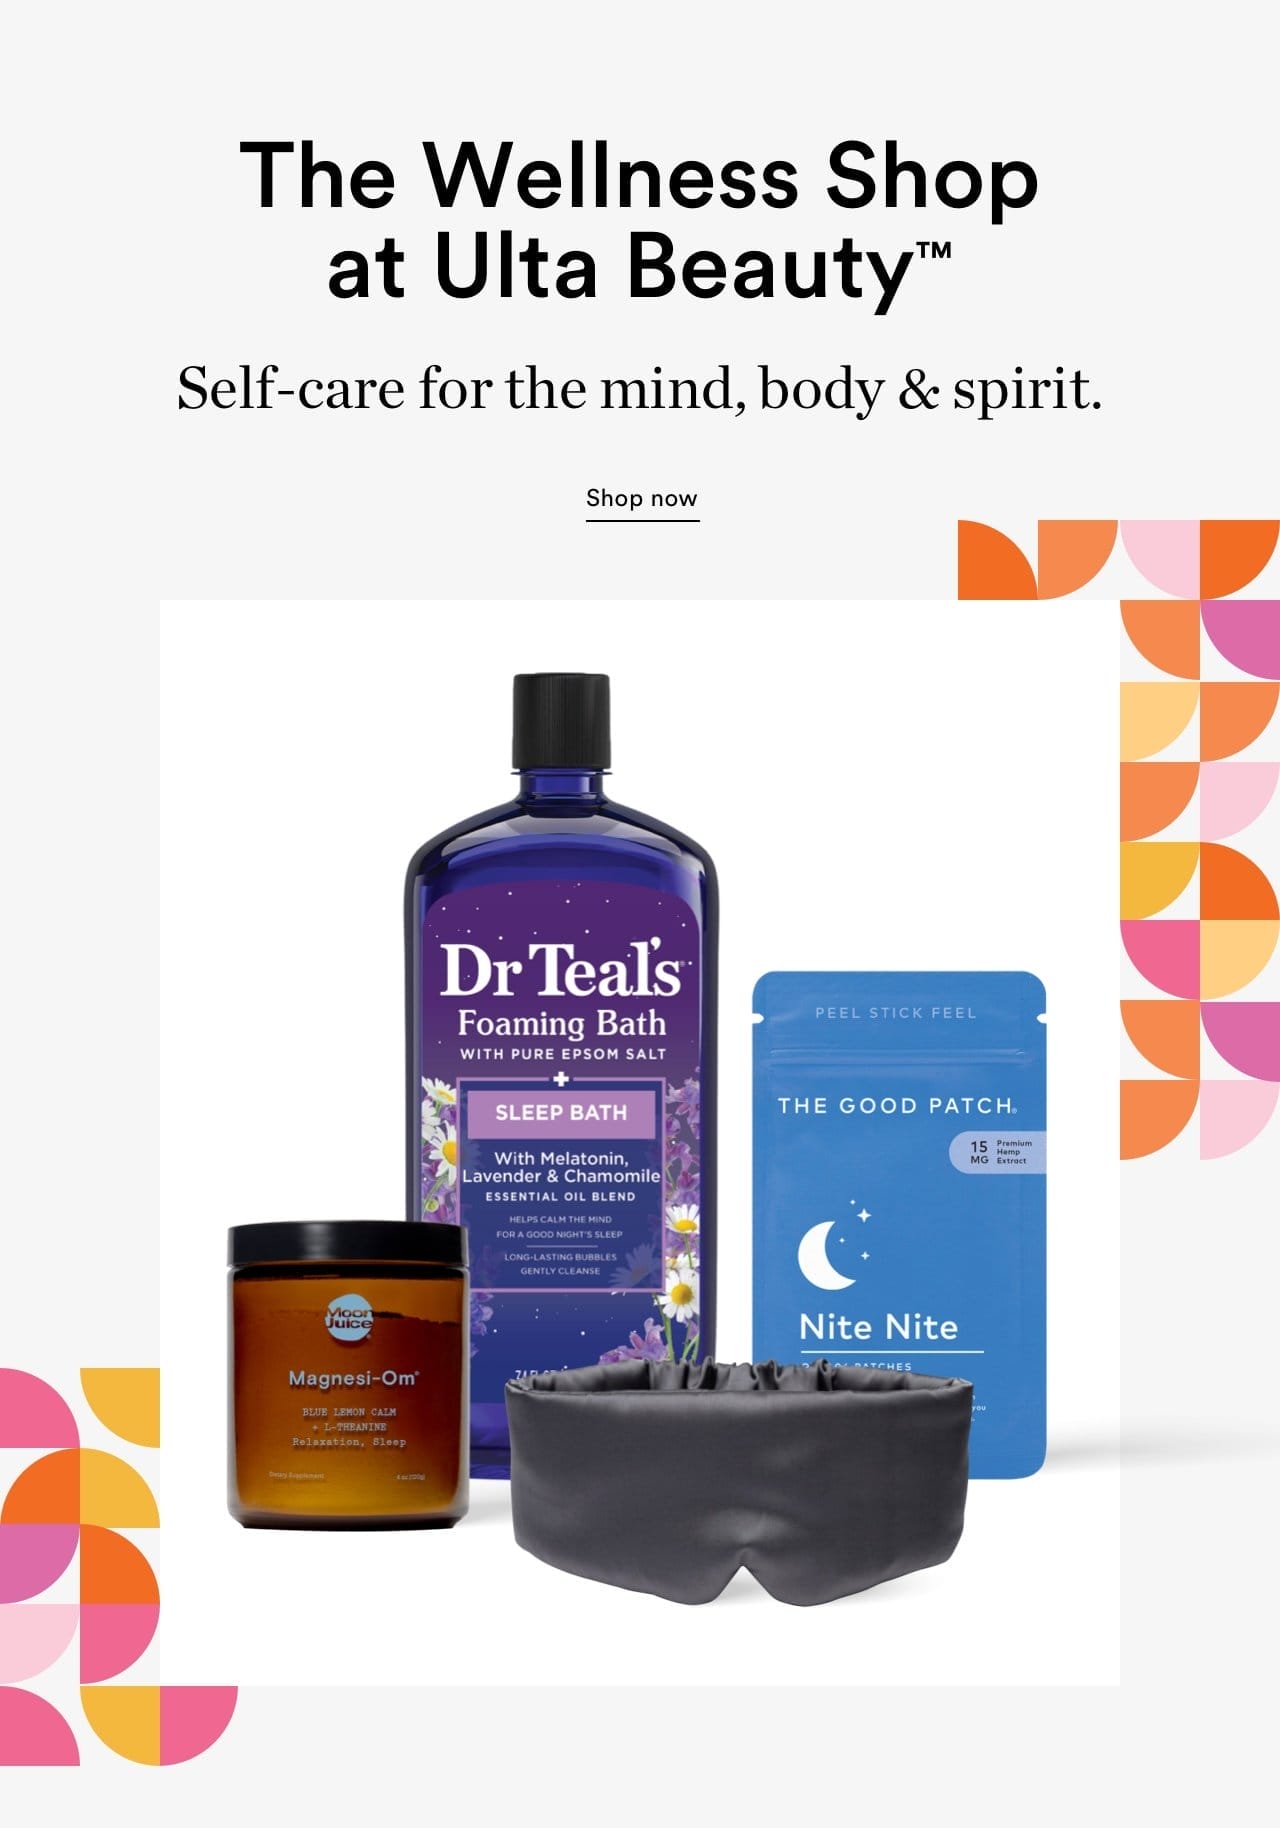 The Wellness Shop at Ulta Beauty | Self-care for the mind, body & spirit | Shop now